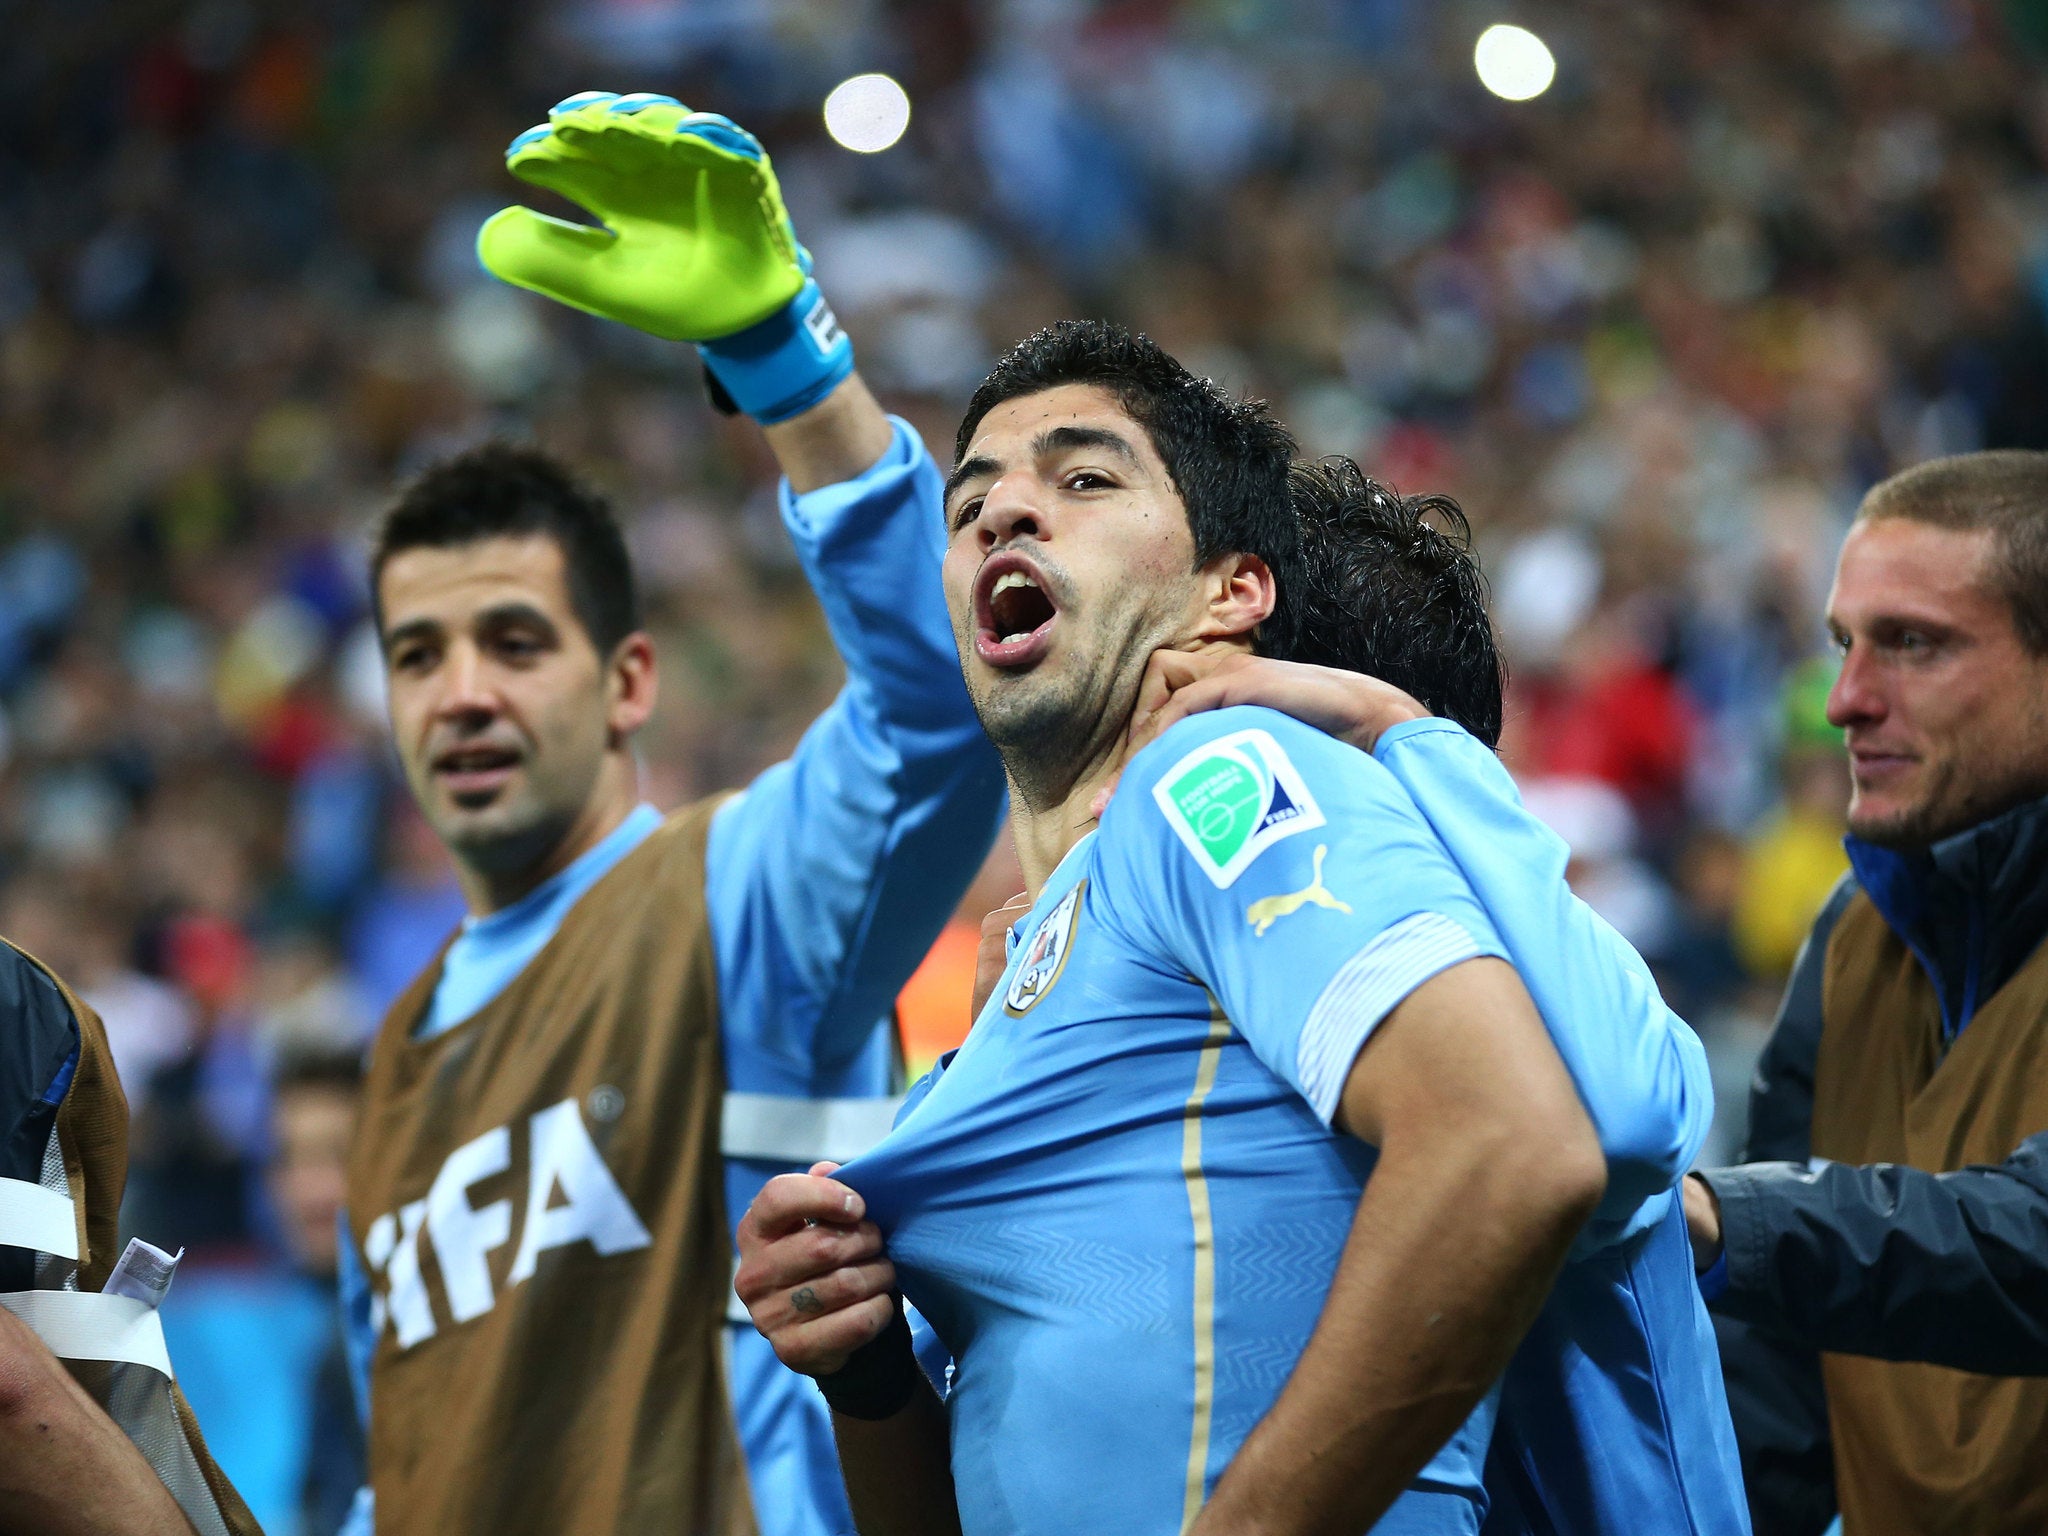 Luis Suarez of Uruguay celebrates with his teammates after scoring his team's second goal during the 2014 FIFA World Cup Brazil Group D match between Uruguay and England at Arena de Sao Paulo on June 19, 2014 in Sao Paulo, Brazil.